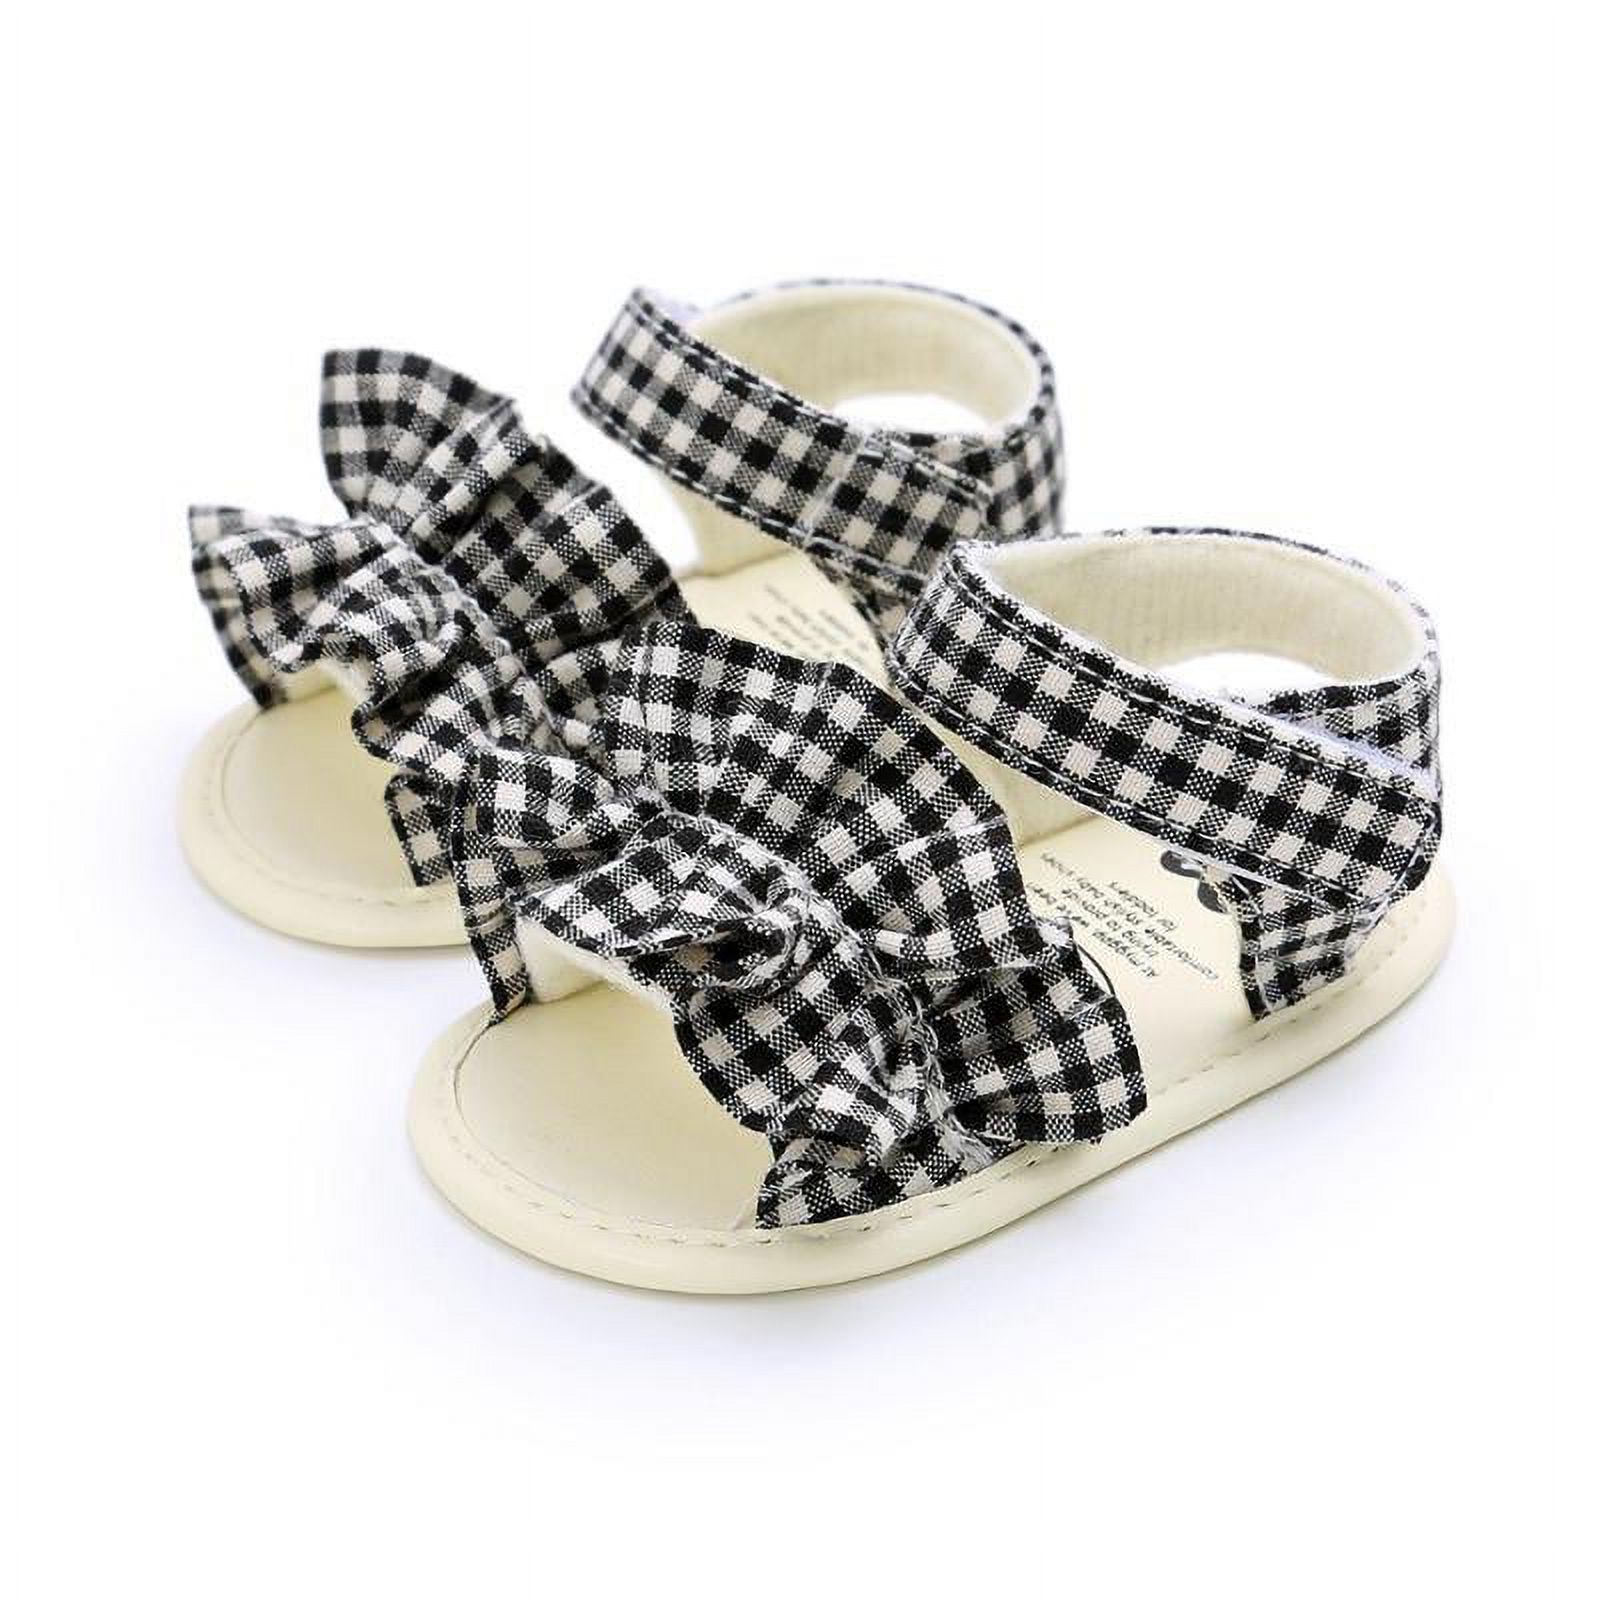 Infant Baby Boys Girls Sandals Summer Baby Dress Shoes Soft Sole Newborn Crib Shoes First Walkers Prewalker Shoe - image 3 of 6